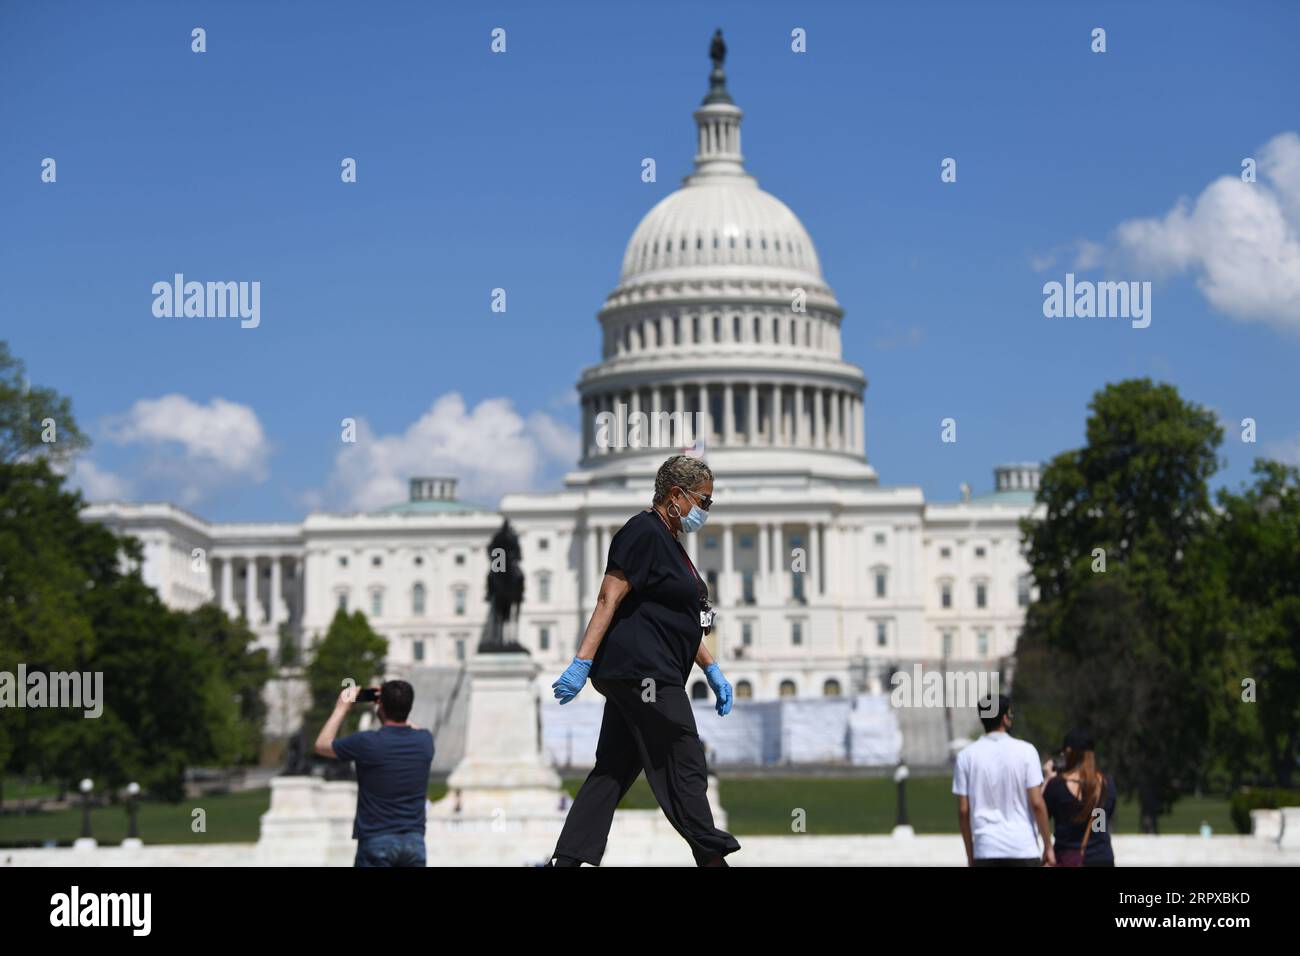 200516 -- WASHINGTON D.C., May 16, 2020 -- A woman wearing a face mask walks past the U.S. Capitol building in Washington D.C., the United States, May 15, 2020. U.S. House of Representatives on Friday passed a 3-trillion-U.S.-dollar coronavirus relief package, which was proposed by Democrats but not likely to gain approval from Republican-held Senate.  U.S.-WASHINGTON D.C.-COVID-19-RELIEF PACKAGE LiuxJie PUBLICATIONxNOTxINxCHN Stock Photo